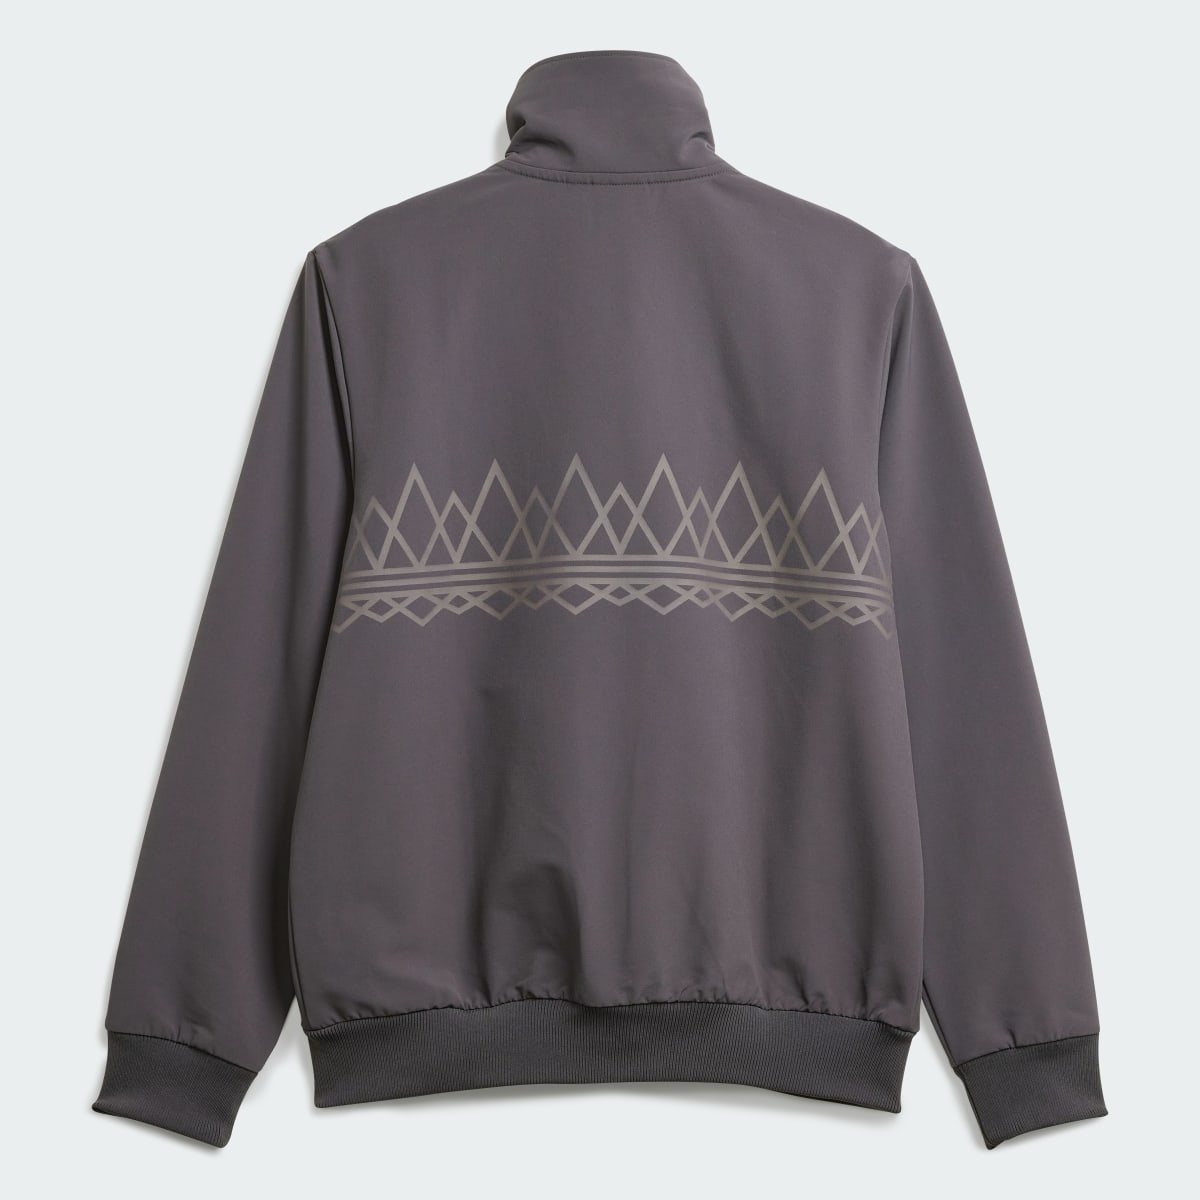 Adidas Suddell Track Top. 7